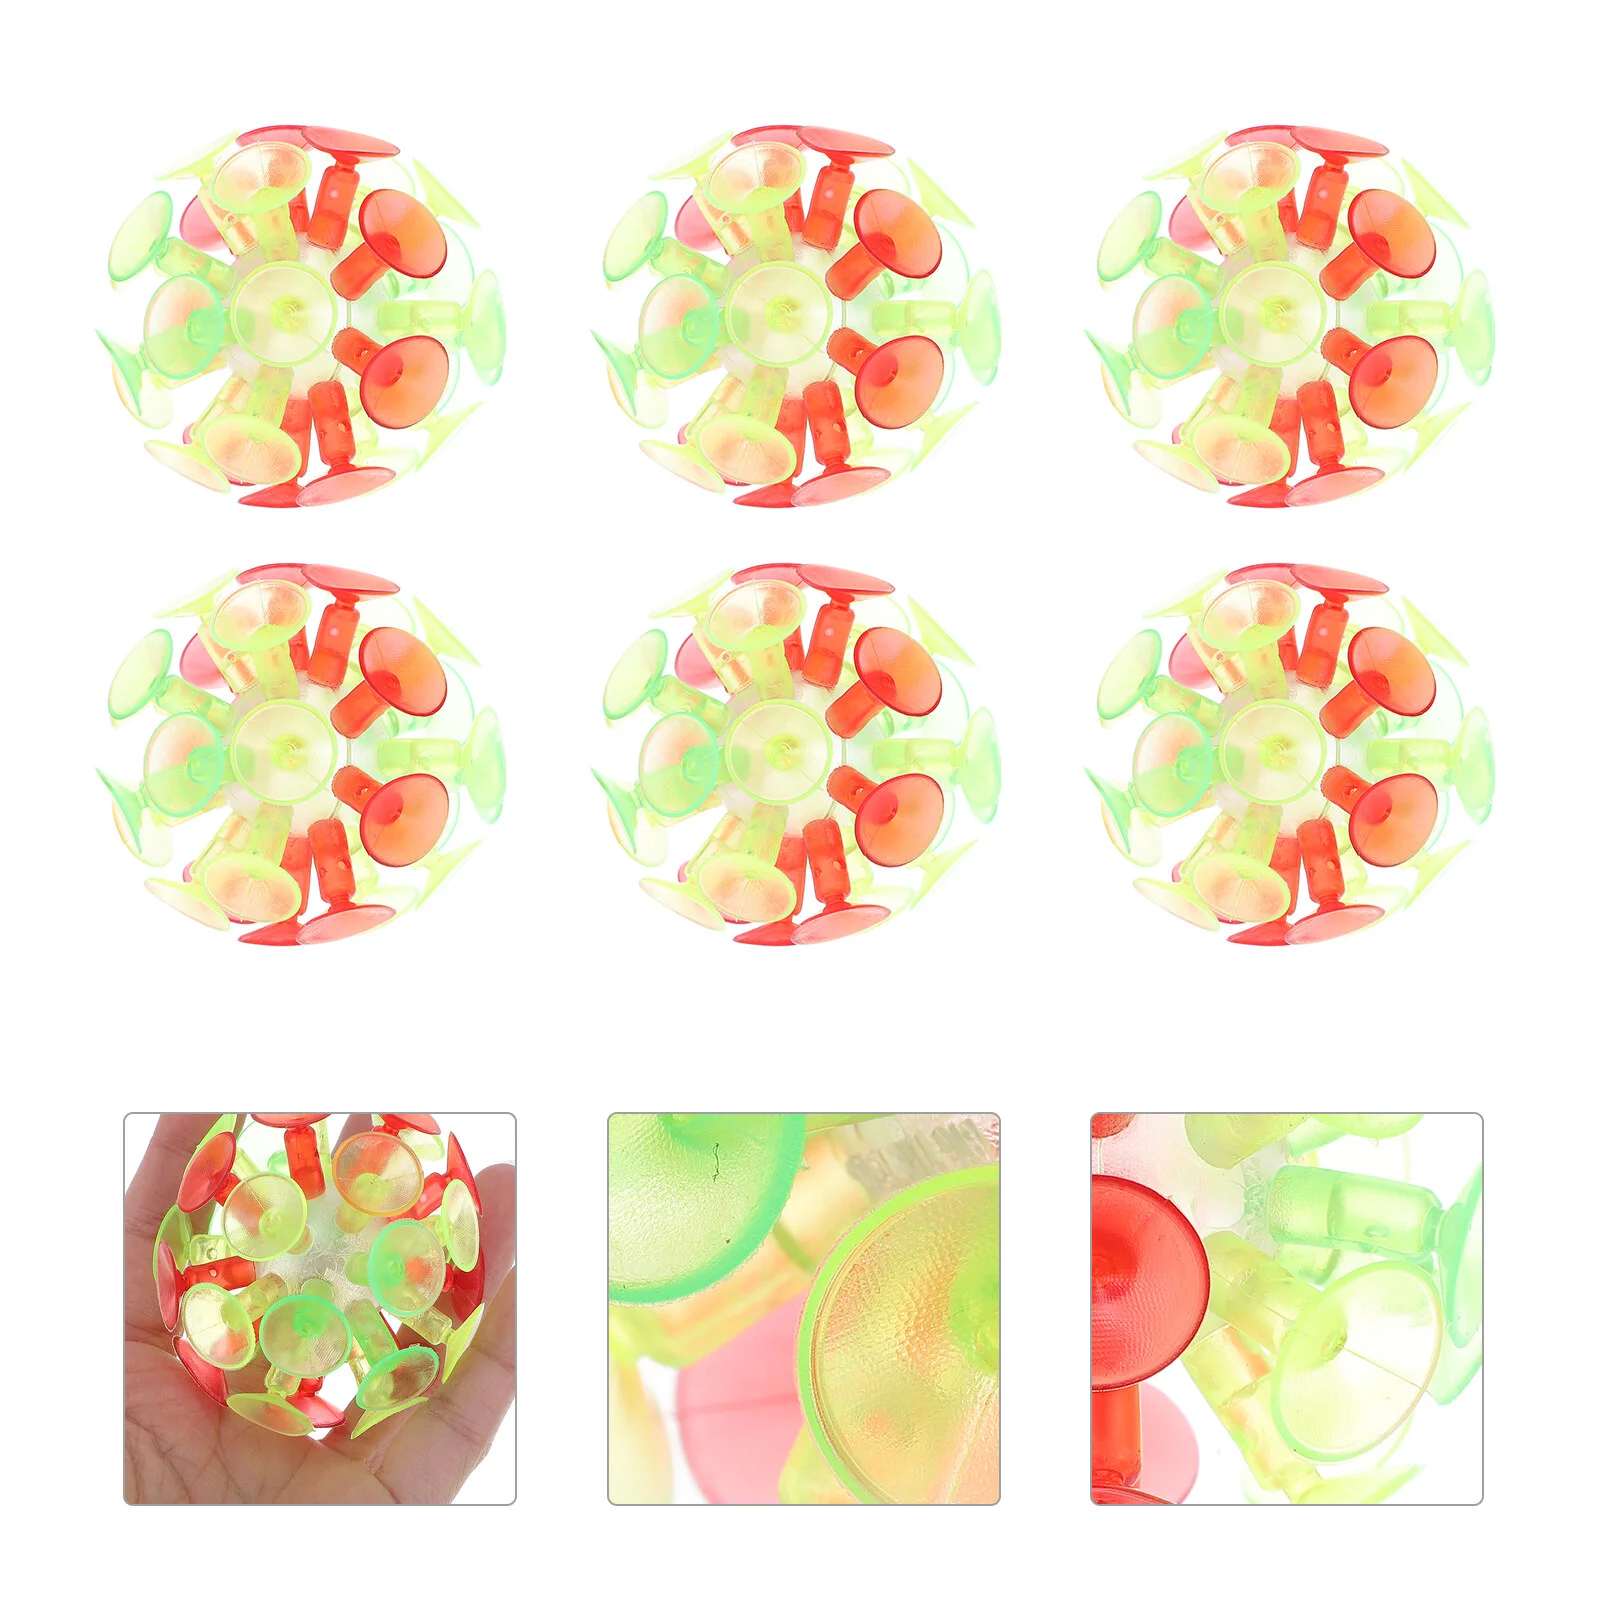 

7PCS Childrens Suction Cup Ball Creative Children Sticking Toy Glowing Parent-child Interaction Balls Kids Plaything